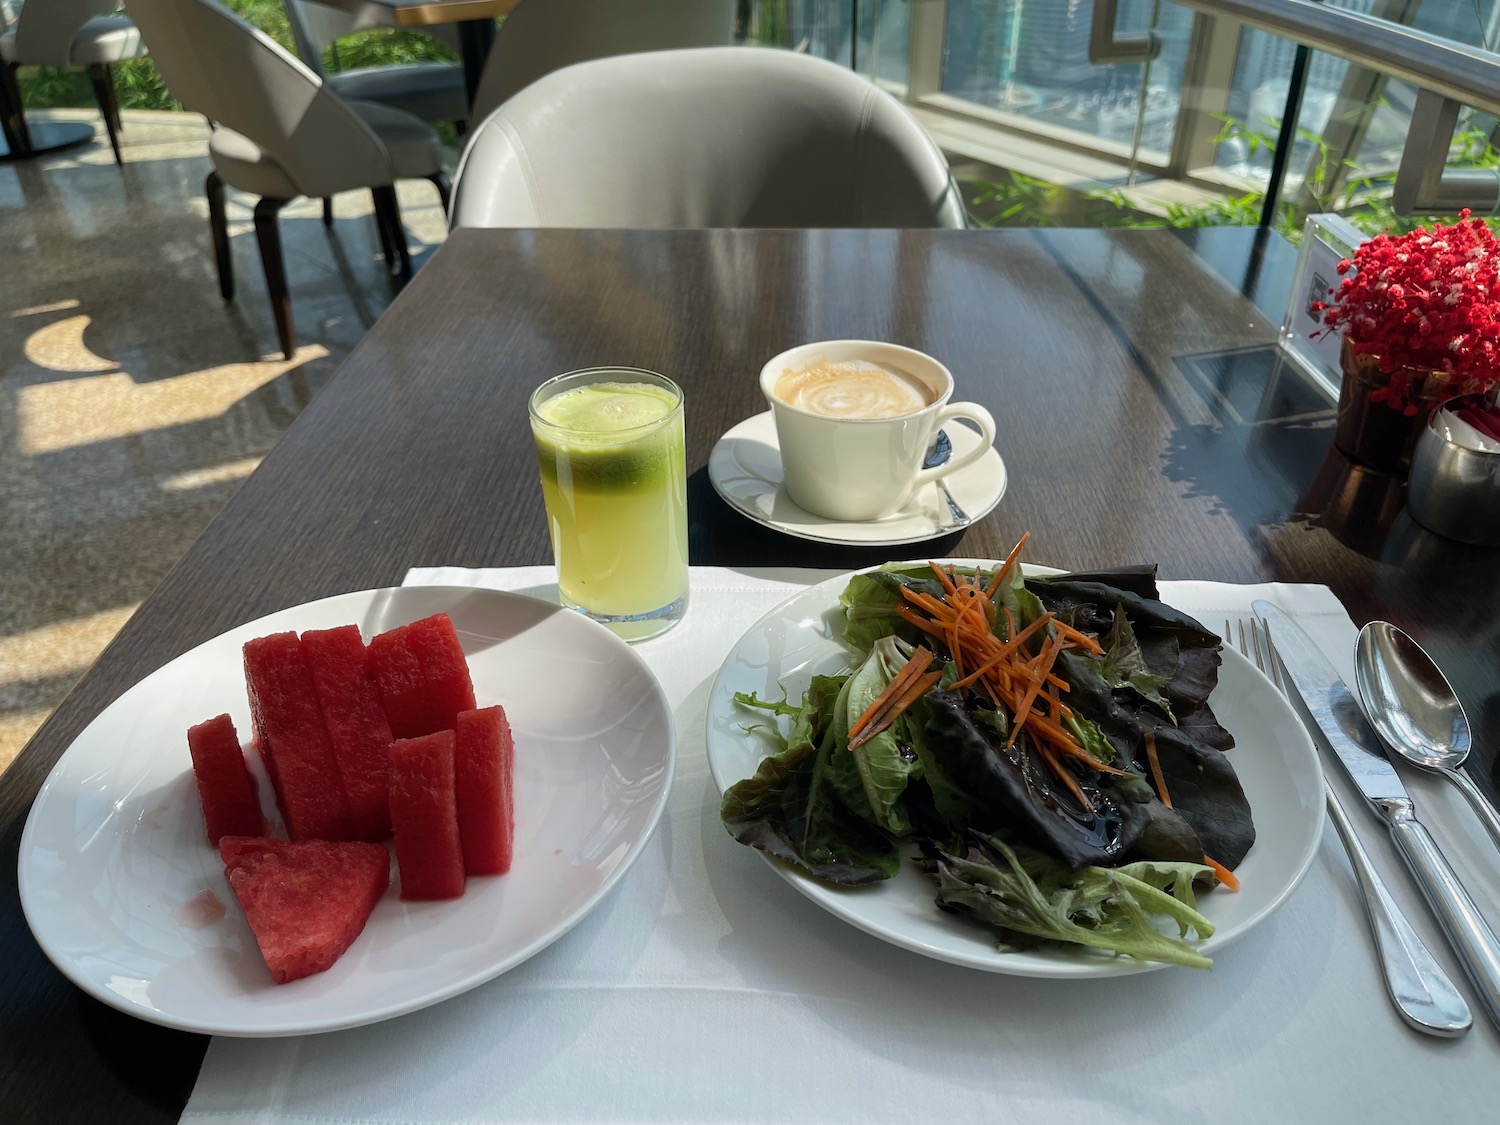 a plate of salad and watermelon on a table